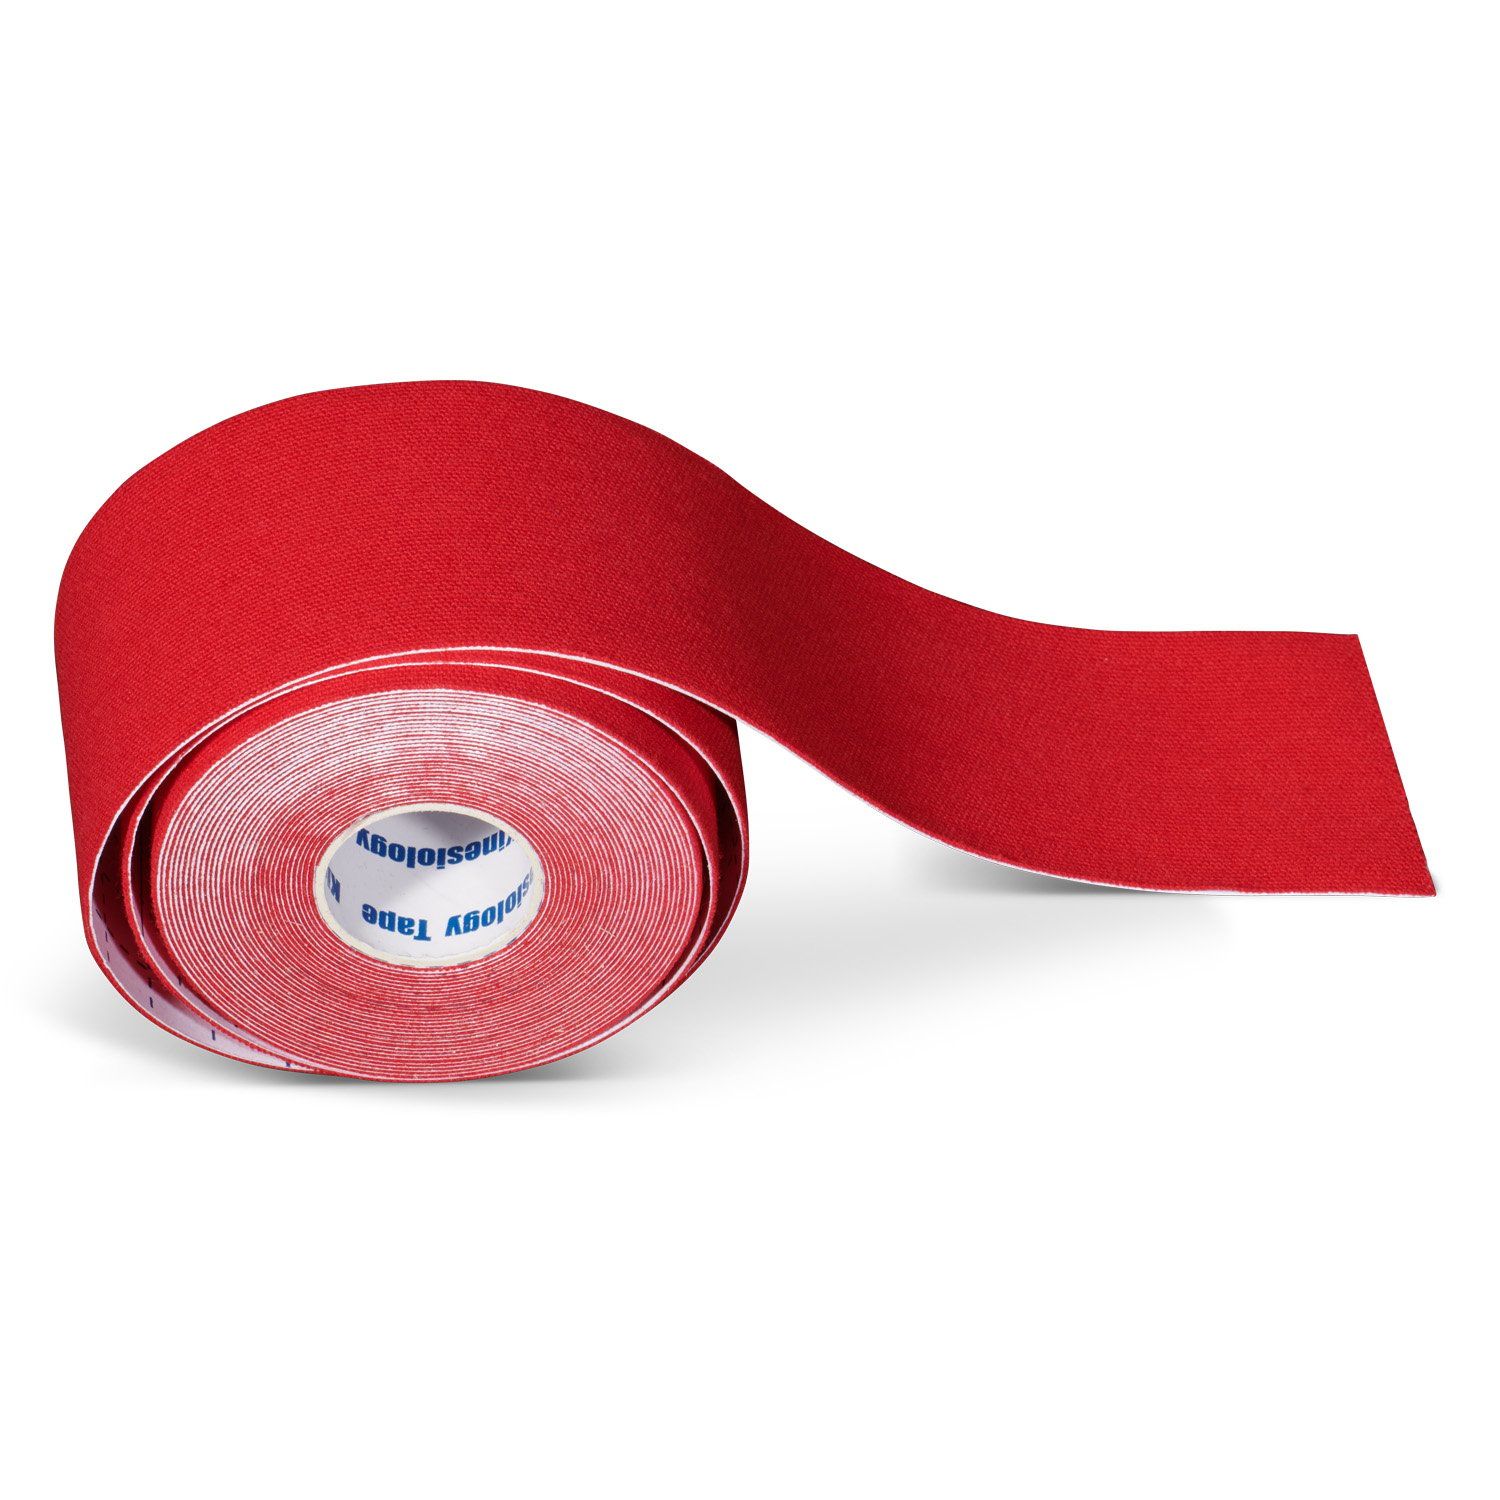 kinesiology tape 4 rolls plus 1 roll for free red